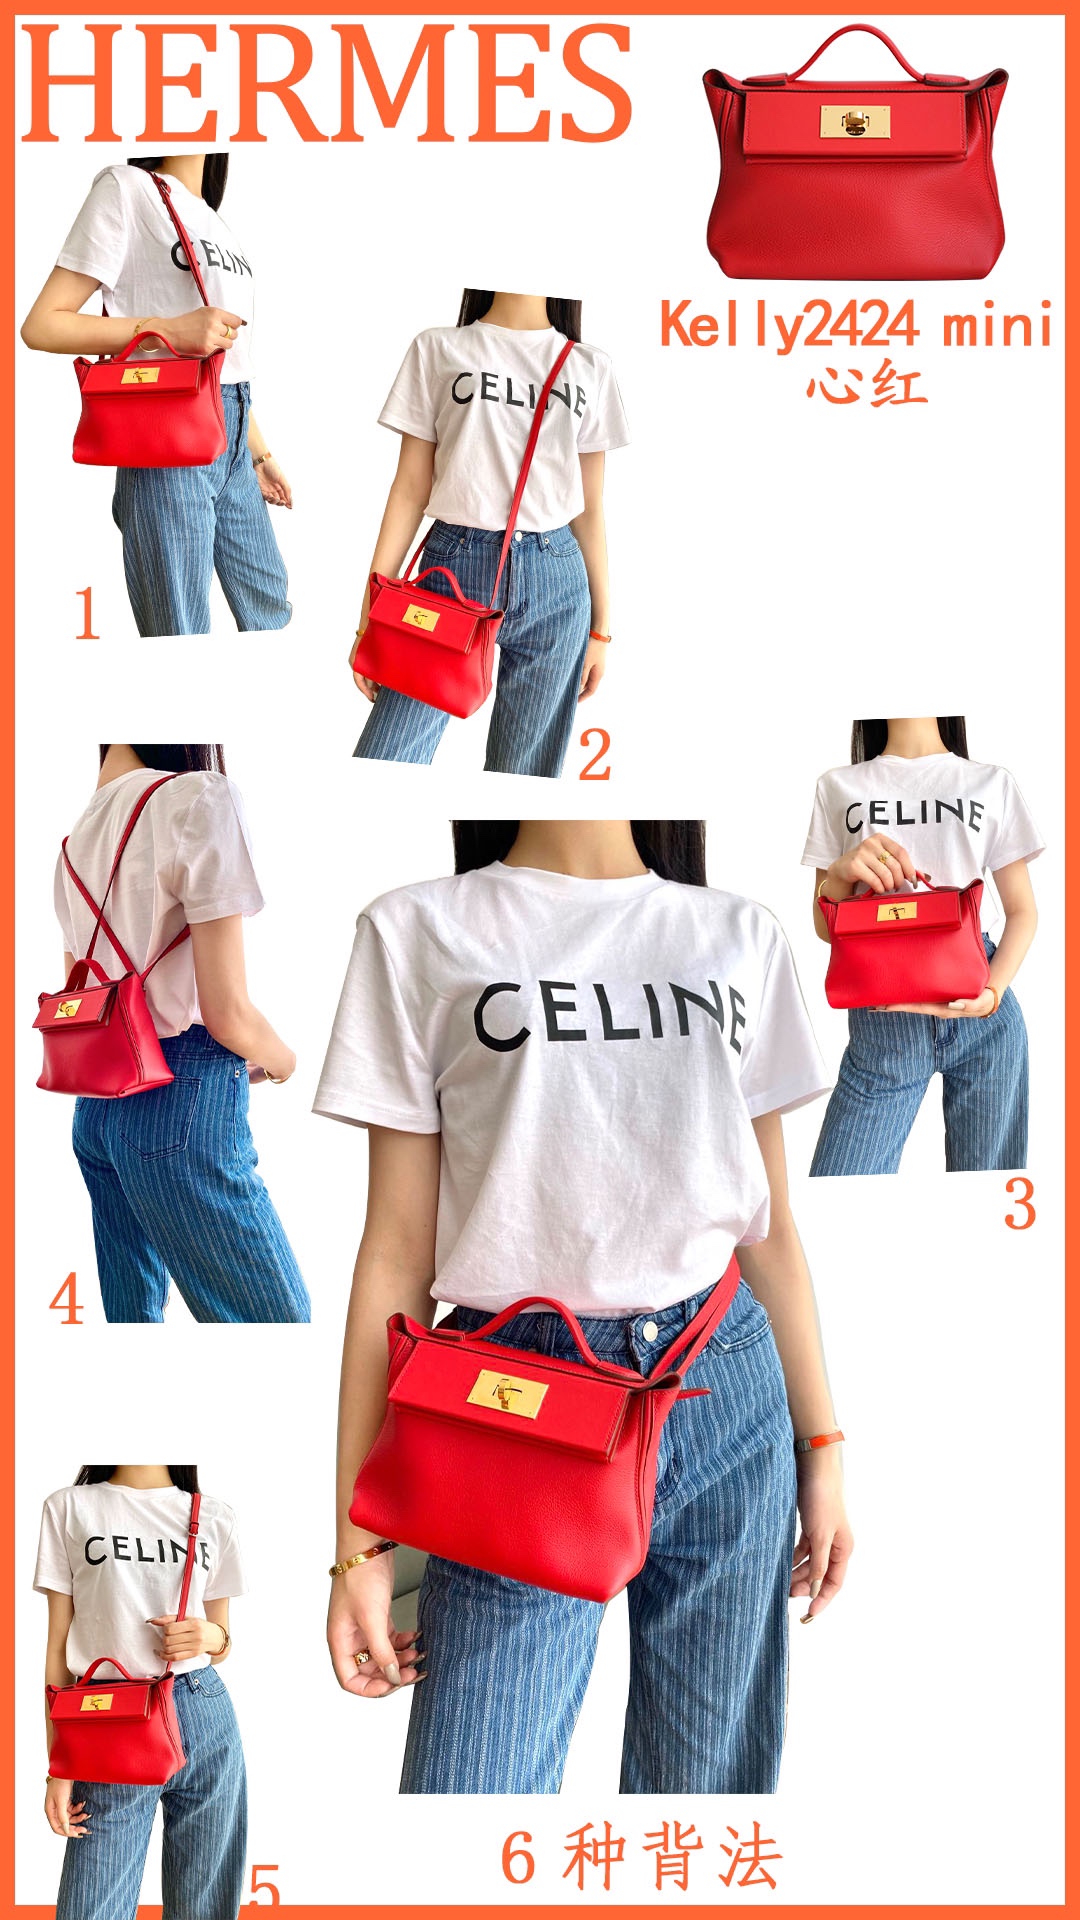 The 24/24 – 21 can be worn in several different ways: belt bag, backpack and sling bag, the choice is yours!!!